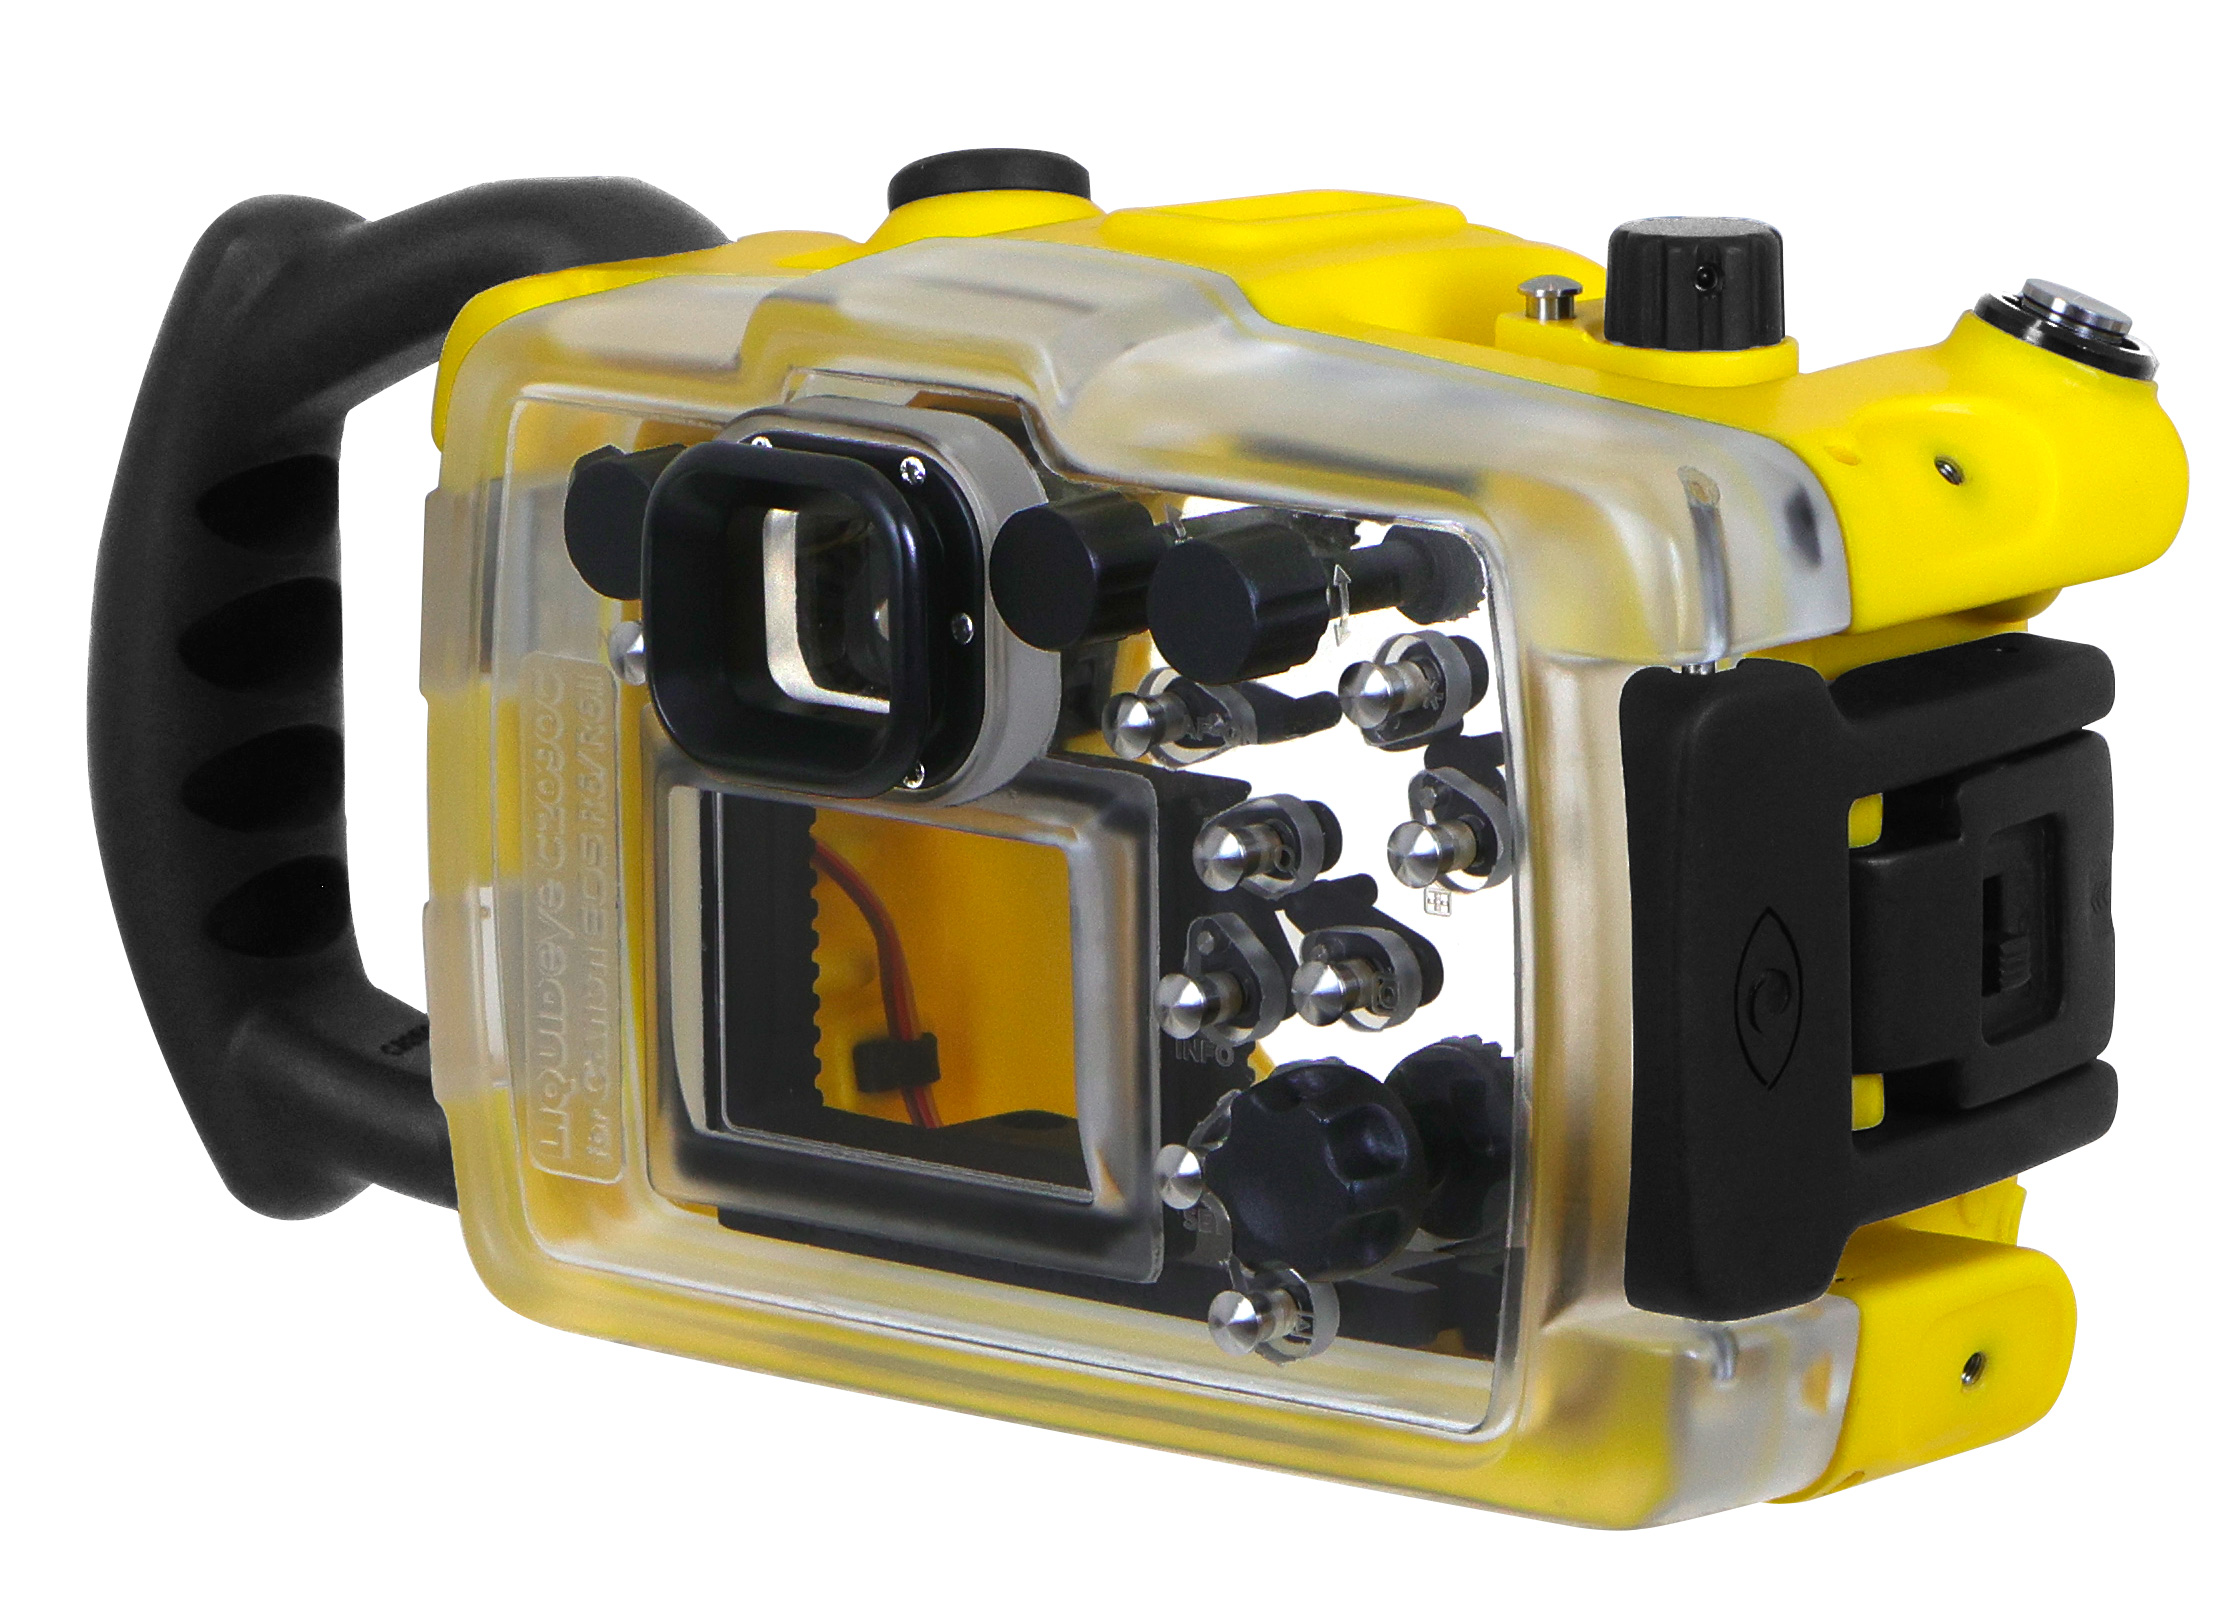 Continued Innovation: The C2090 Underwater Camera Housing System with the “One and Done” Fast Closure System